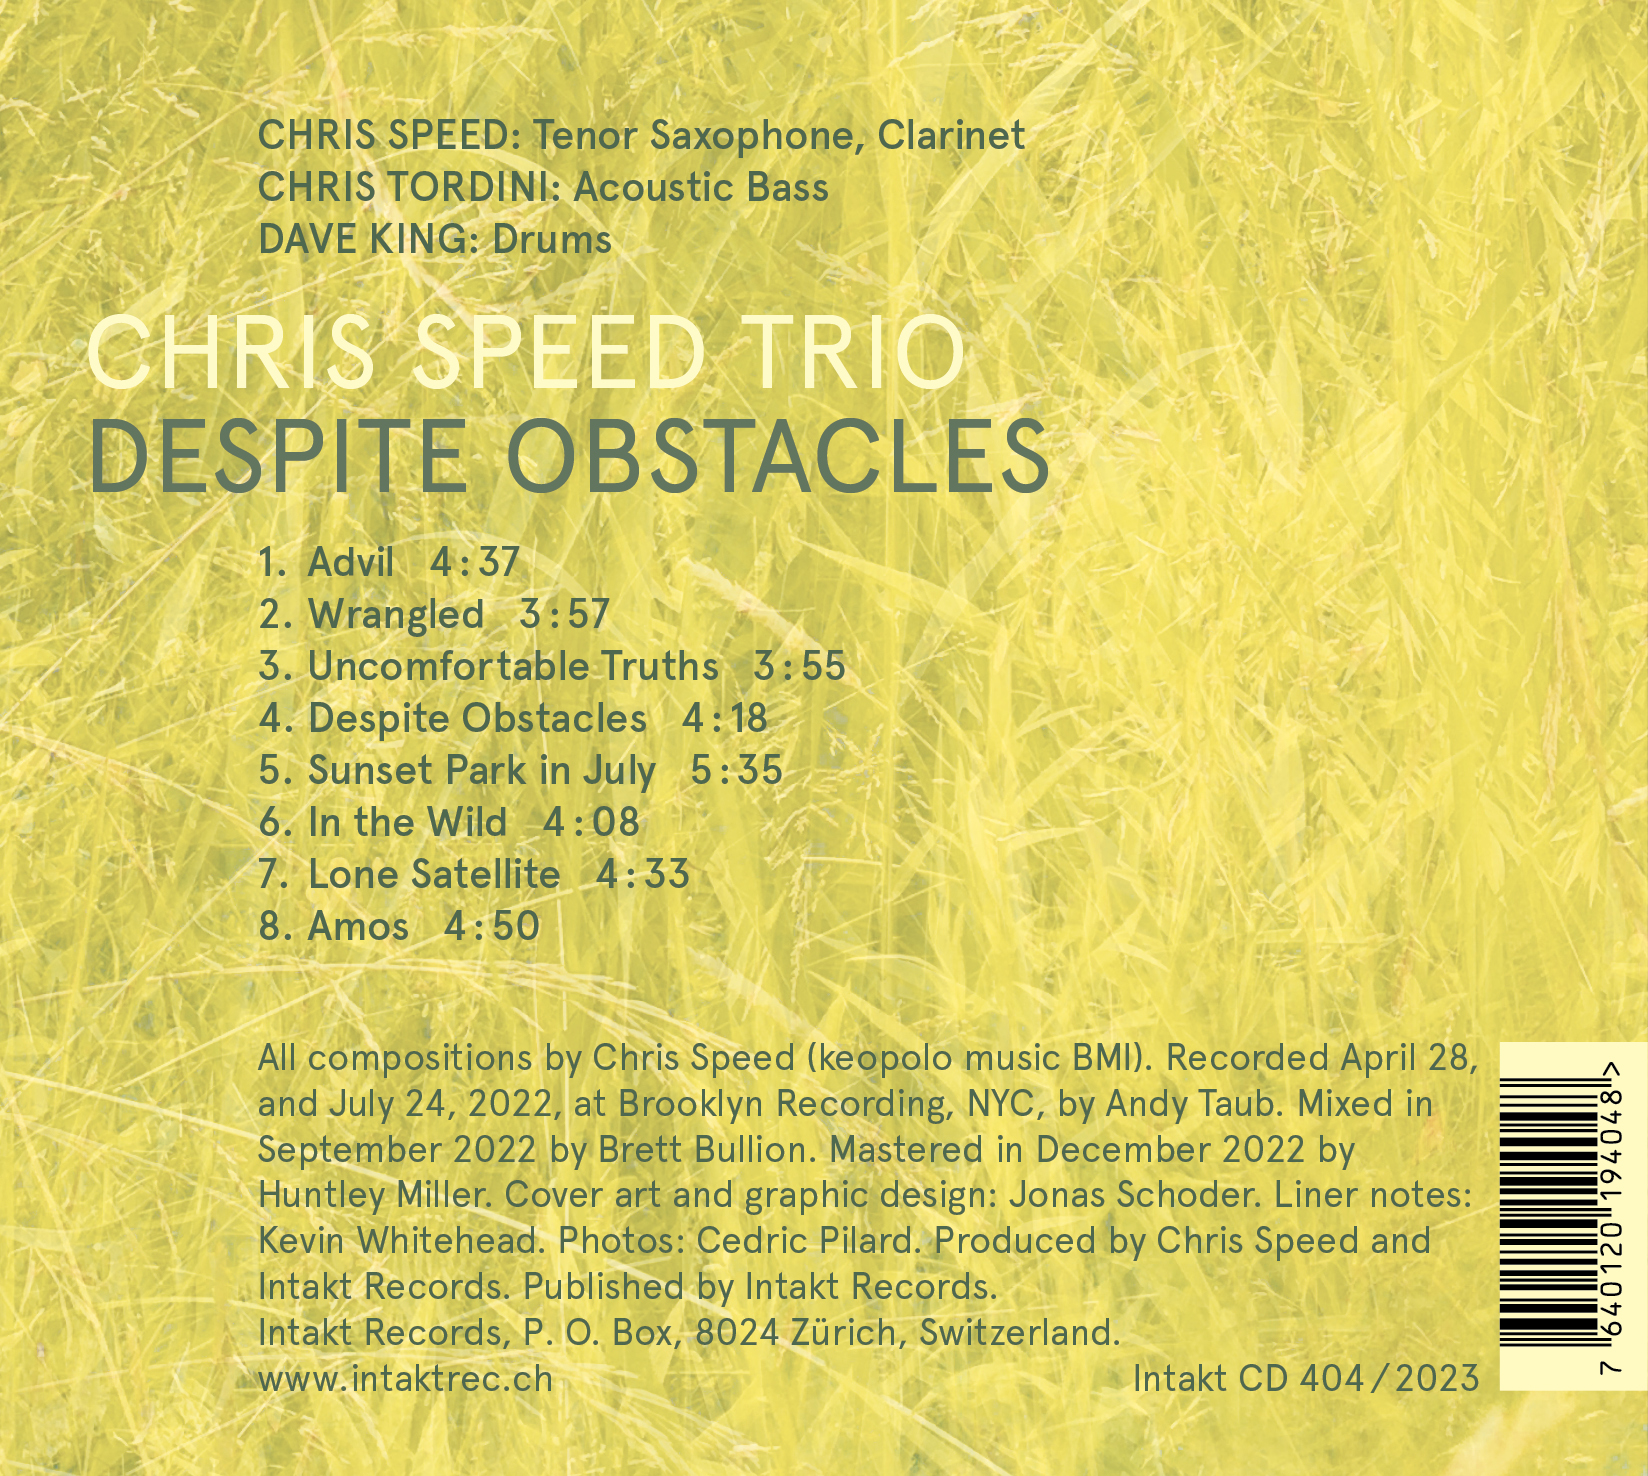 CHRIS SPEED TRIO
DESPITE OBSTACLES cover back